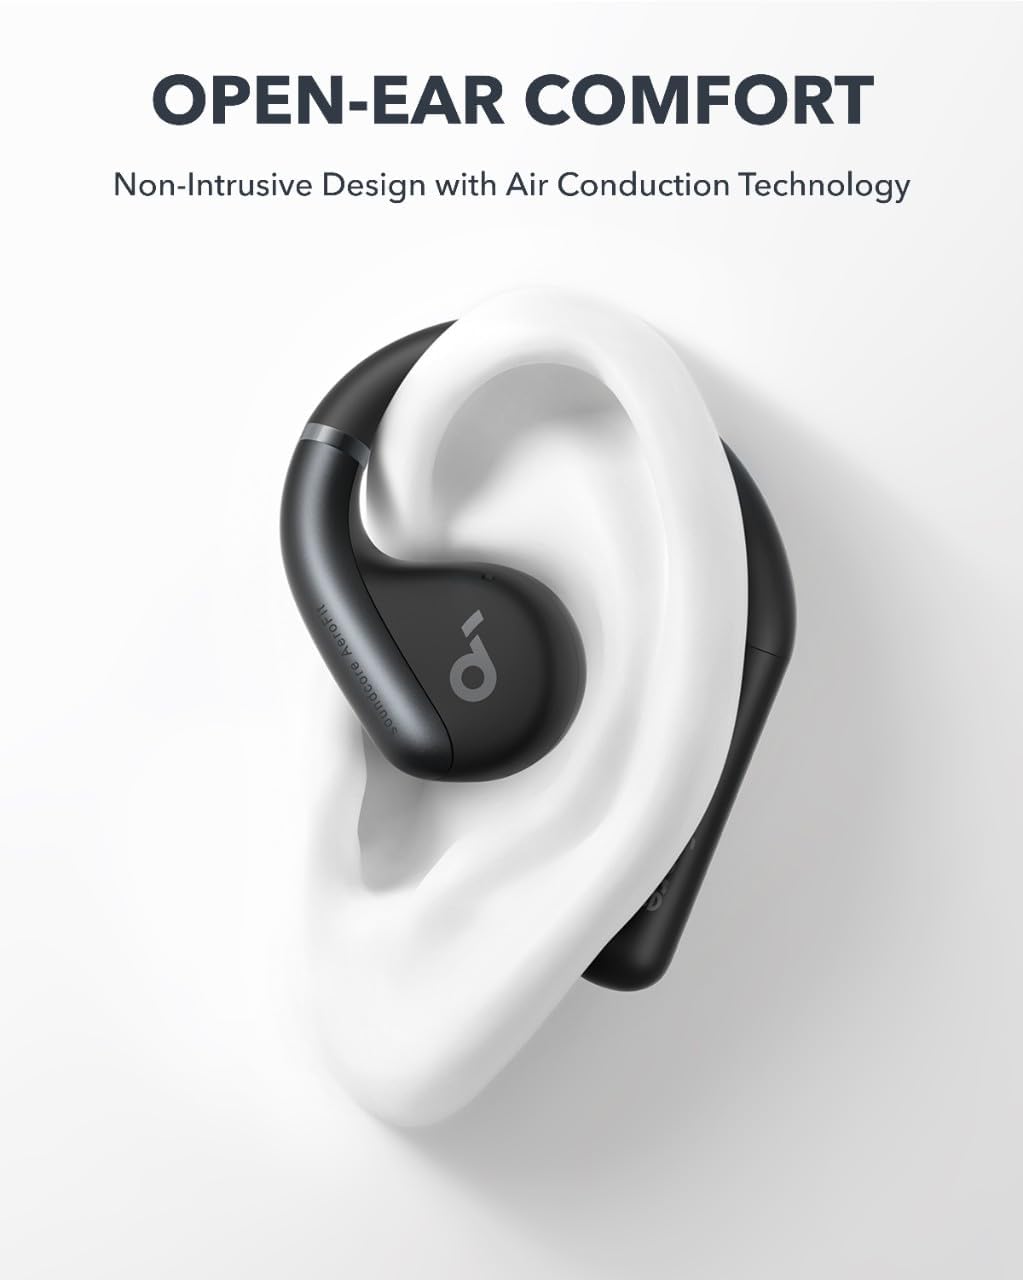 soundcore by Anker, AeroFit Open-Ear Headphones, Ultra Comfort, Ear Hook Design for Small Ears, Balanced Sound, IPX7 Waterproof, 42H Playtime, Bluetooth 5.3, App Control, Clear Calls, Wireless Earbuds, Calm White